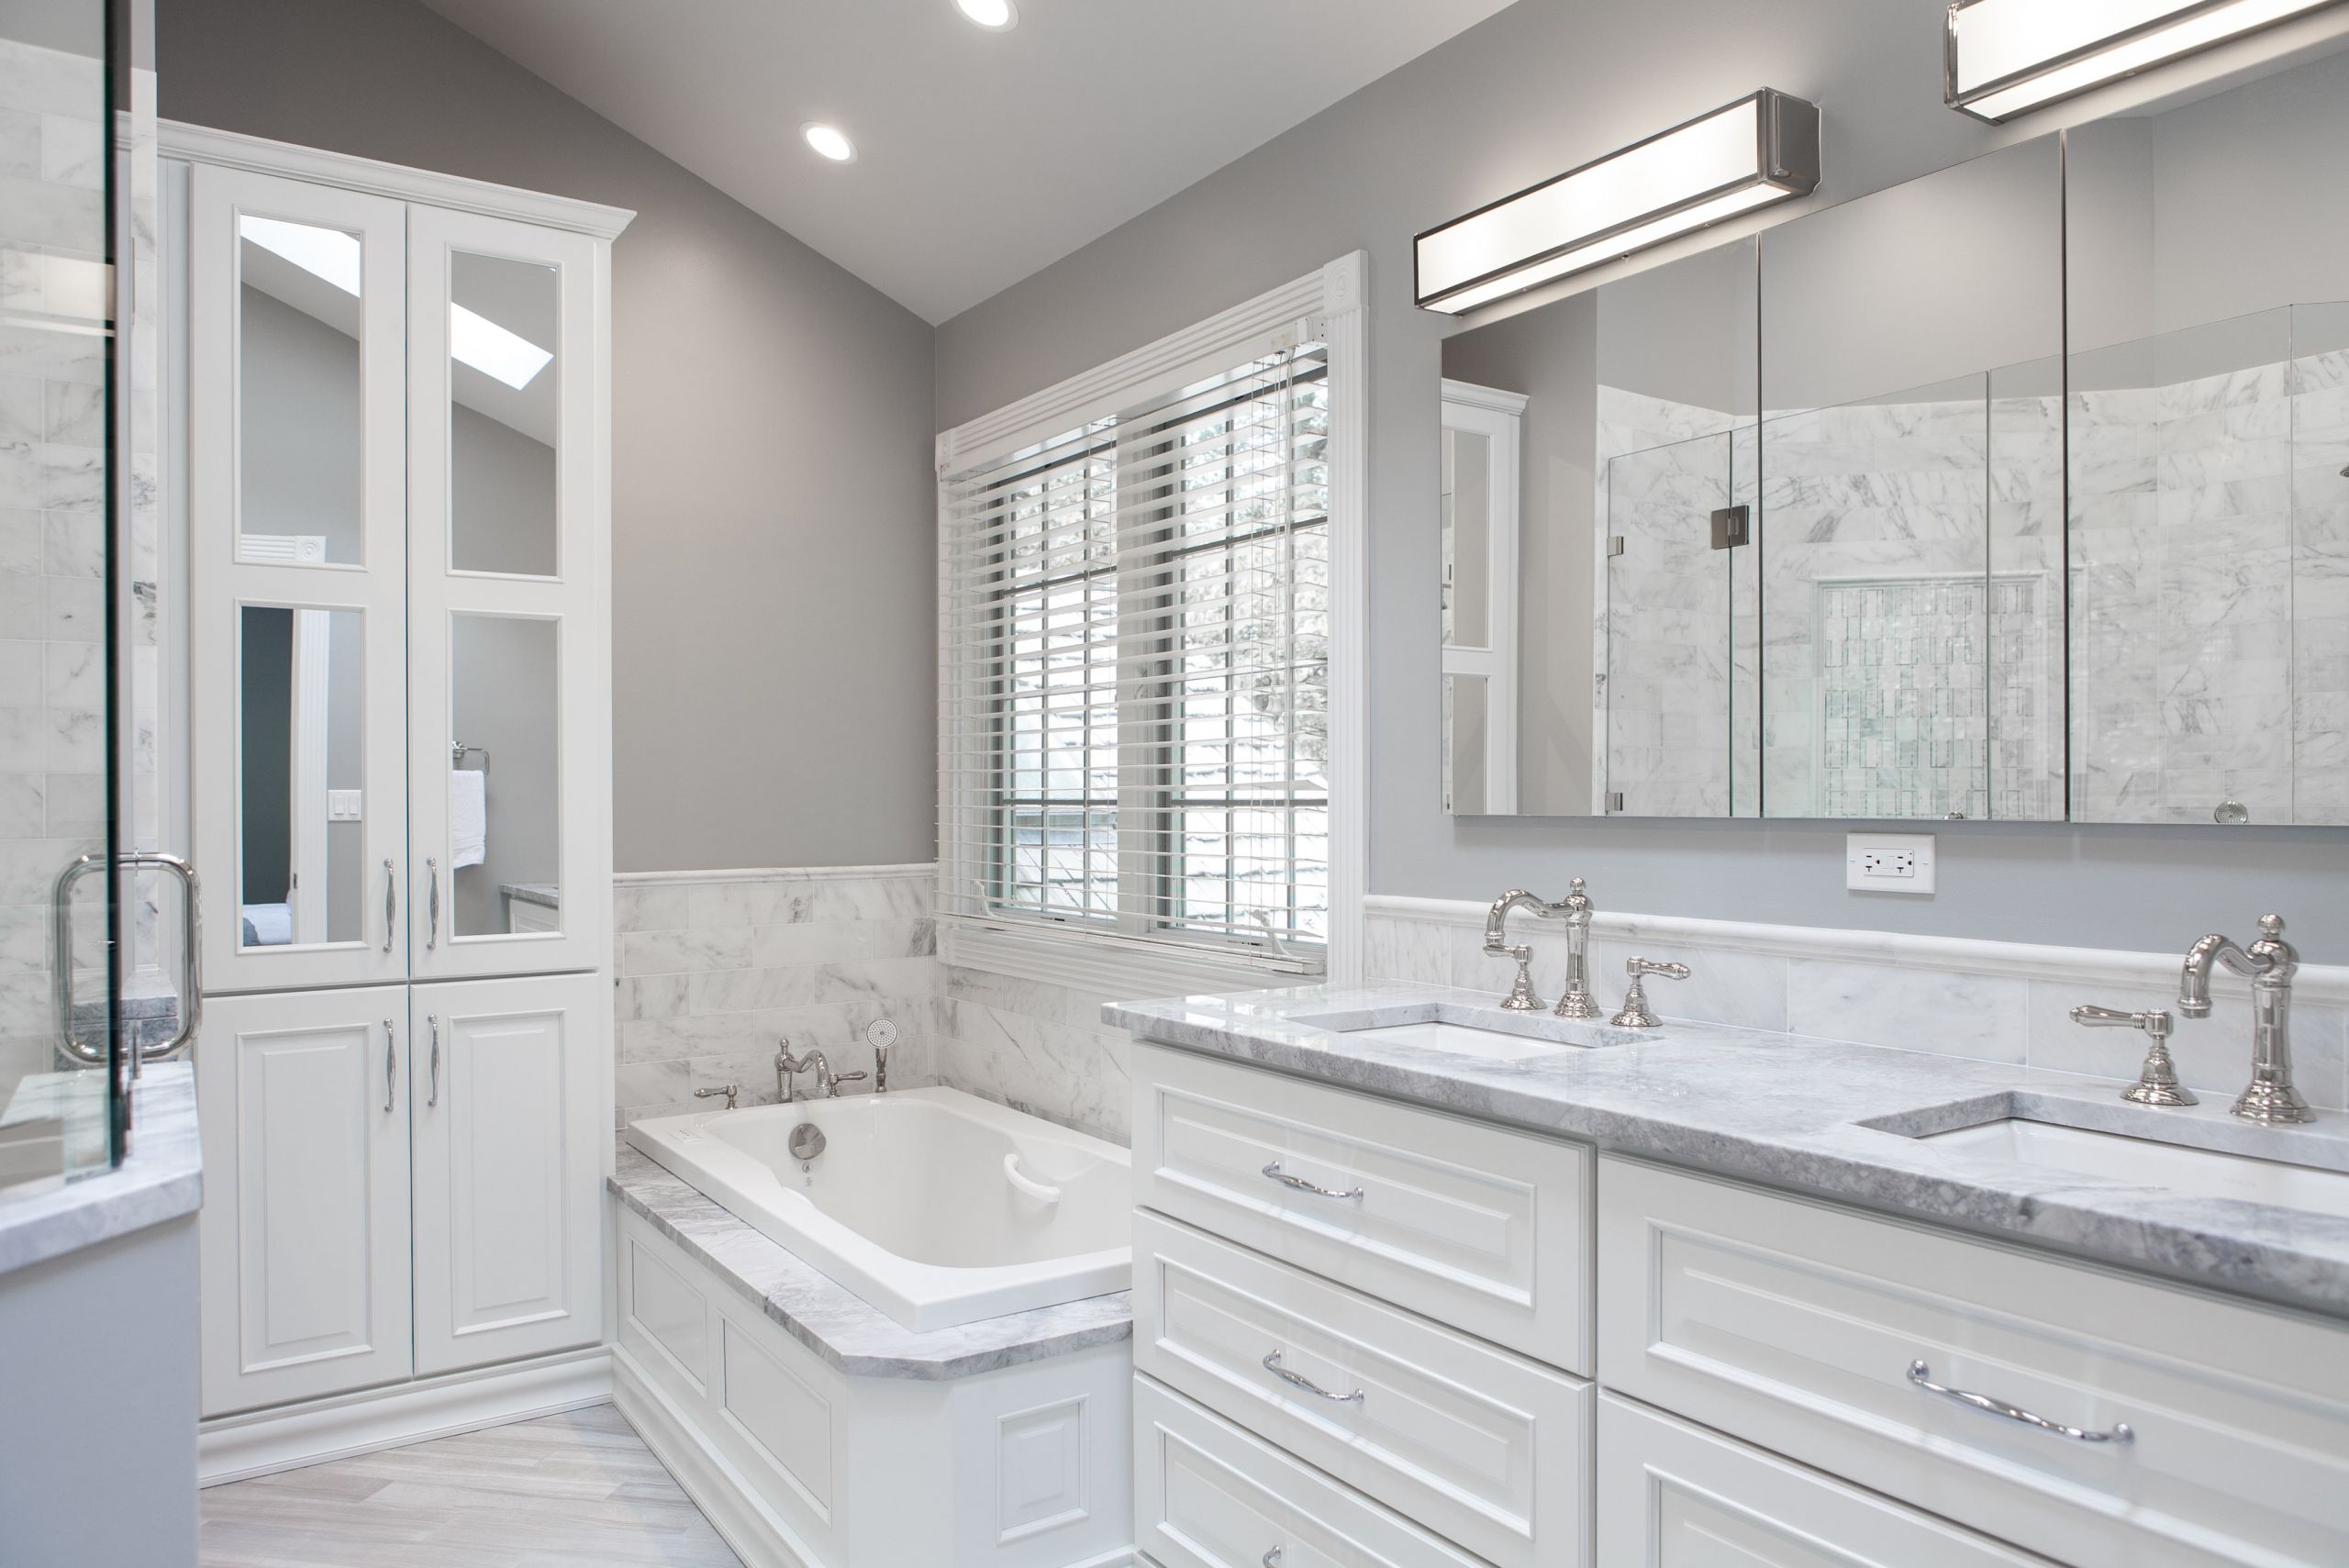 Cost Of Remodeling A Bathroom
 How Much Does a Bathroom Remodel Cost in the Chicago Area